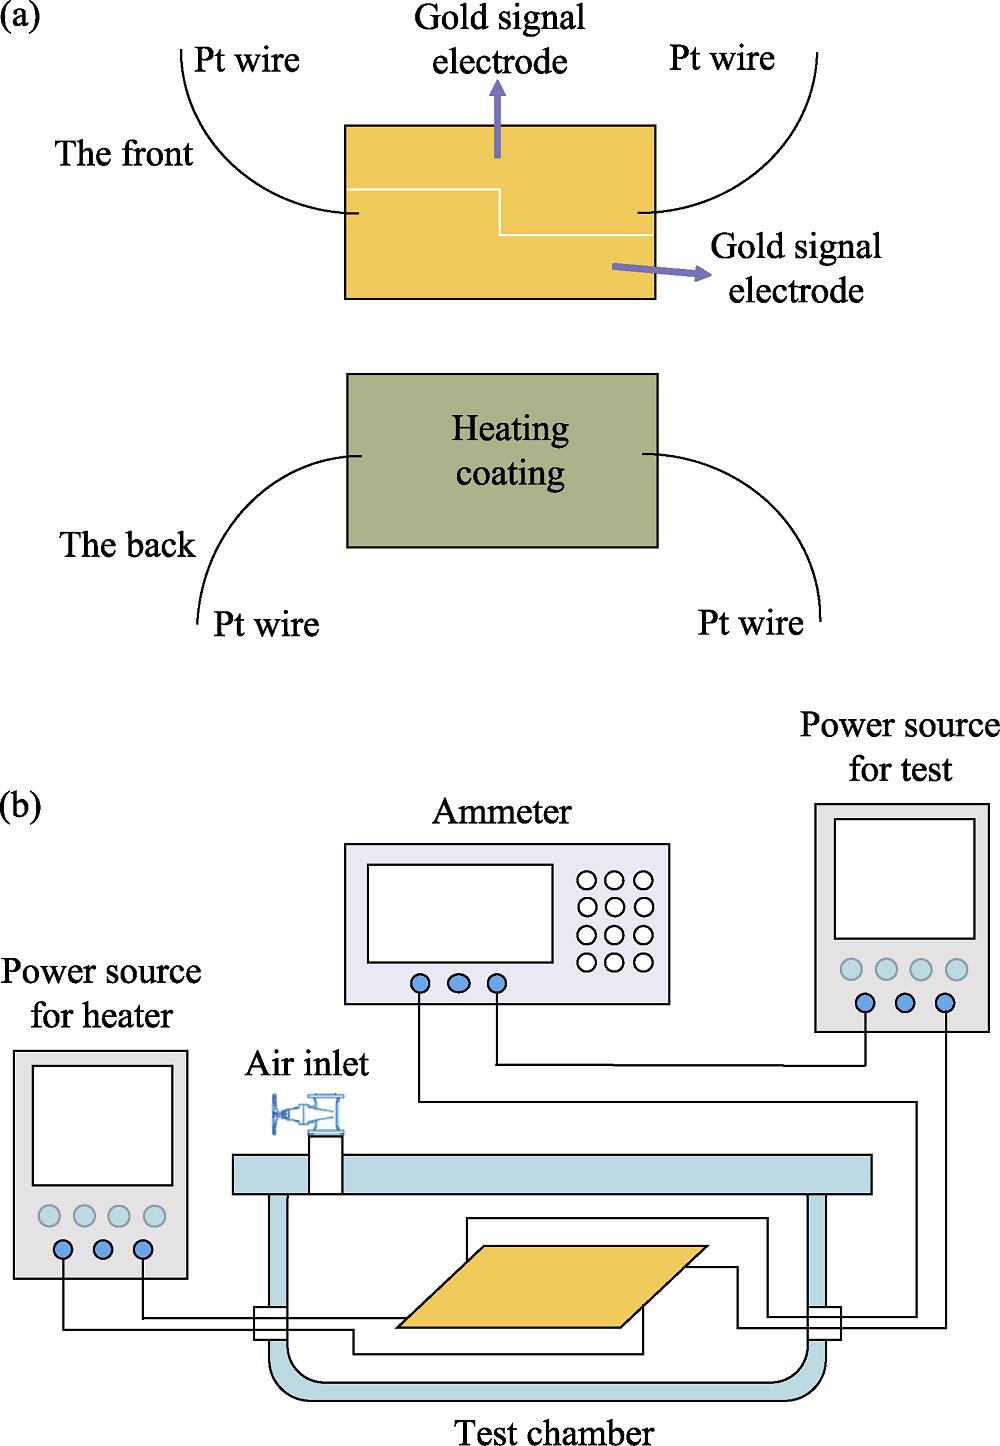 (a) Schematic diagram of the device for gas sensing testing, and (b) circuit diagram of gas sensing test system